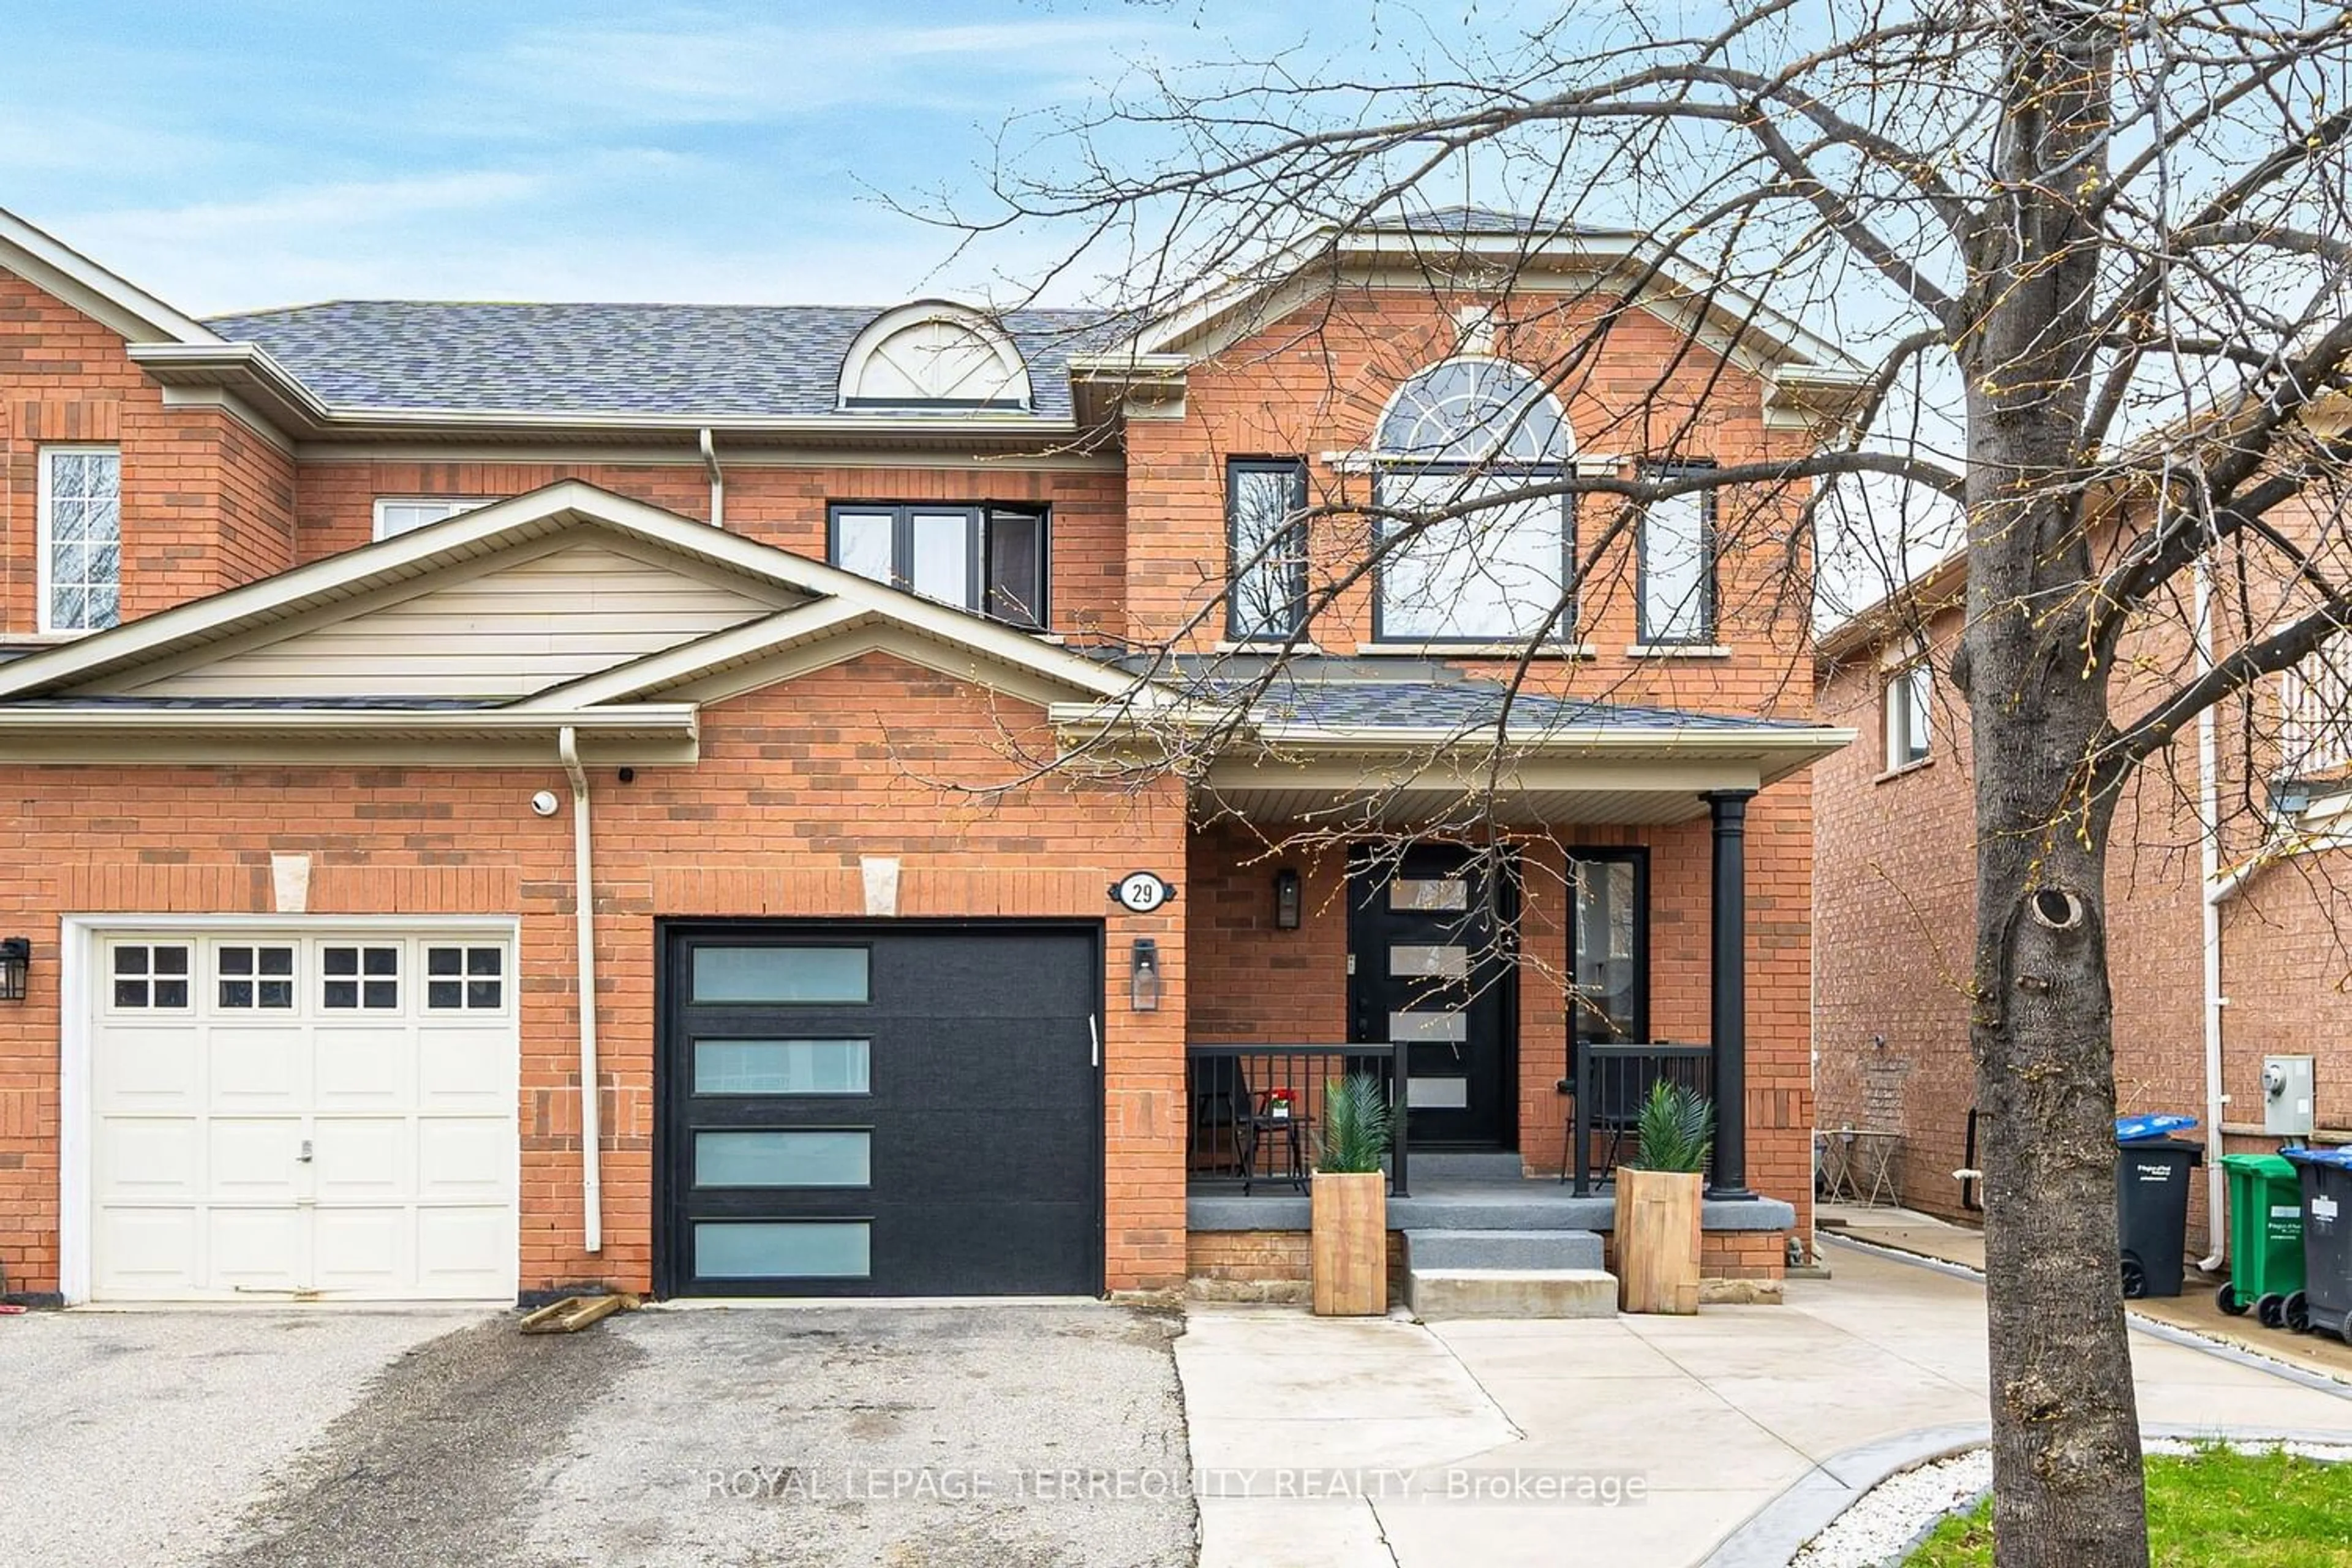 Home with brick exterior material for 29 Topiary Lane, Brampton Ontario L7A 2R4